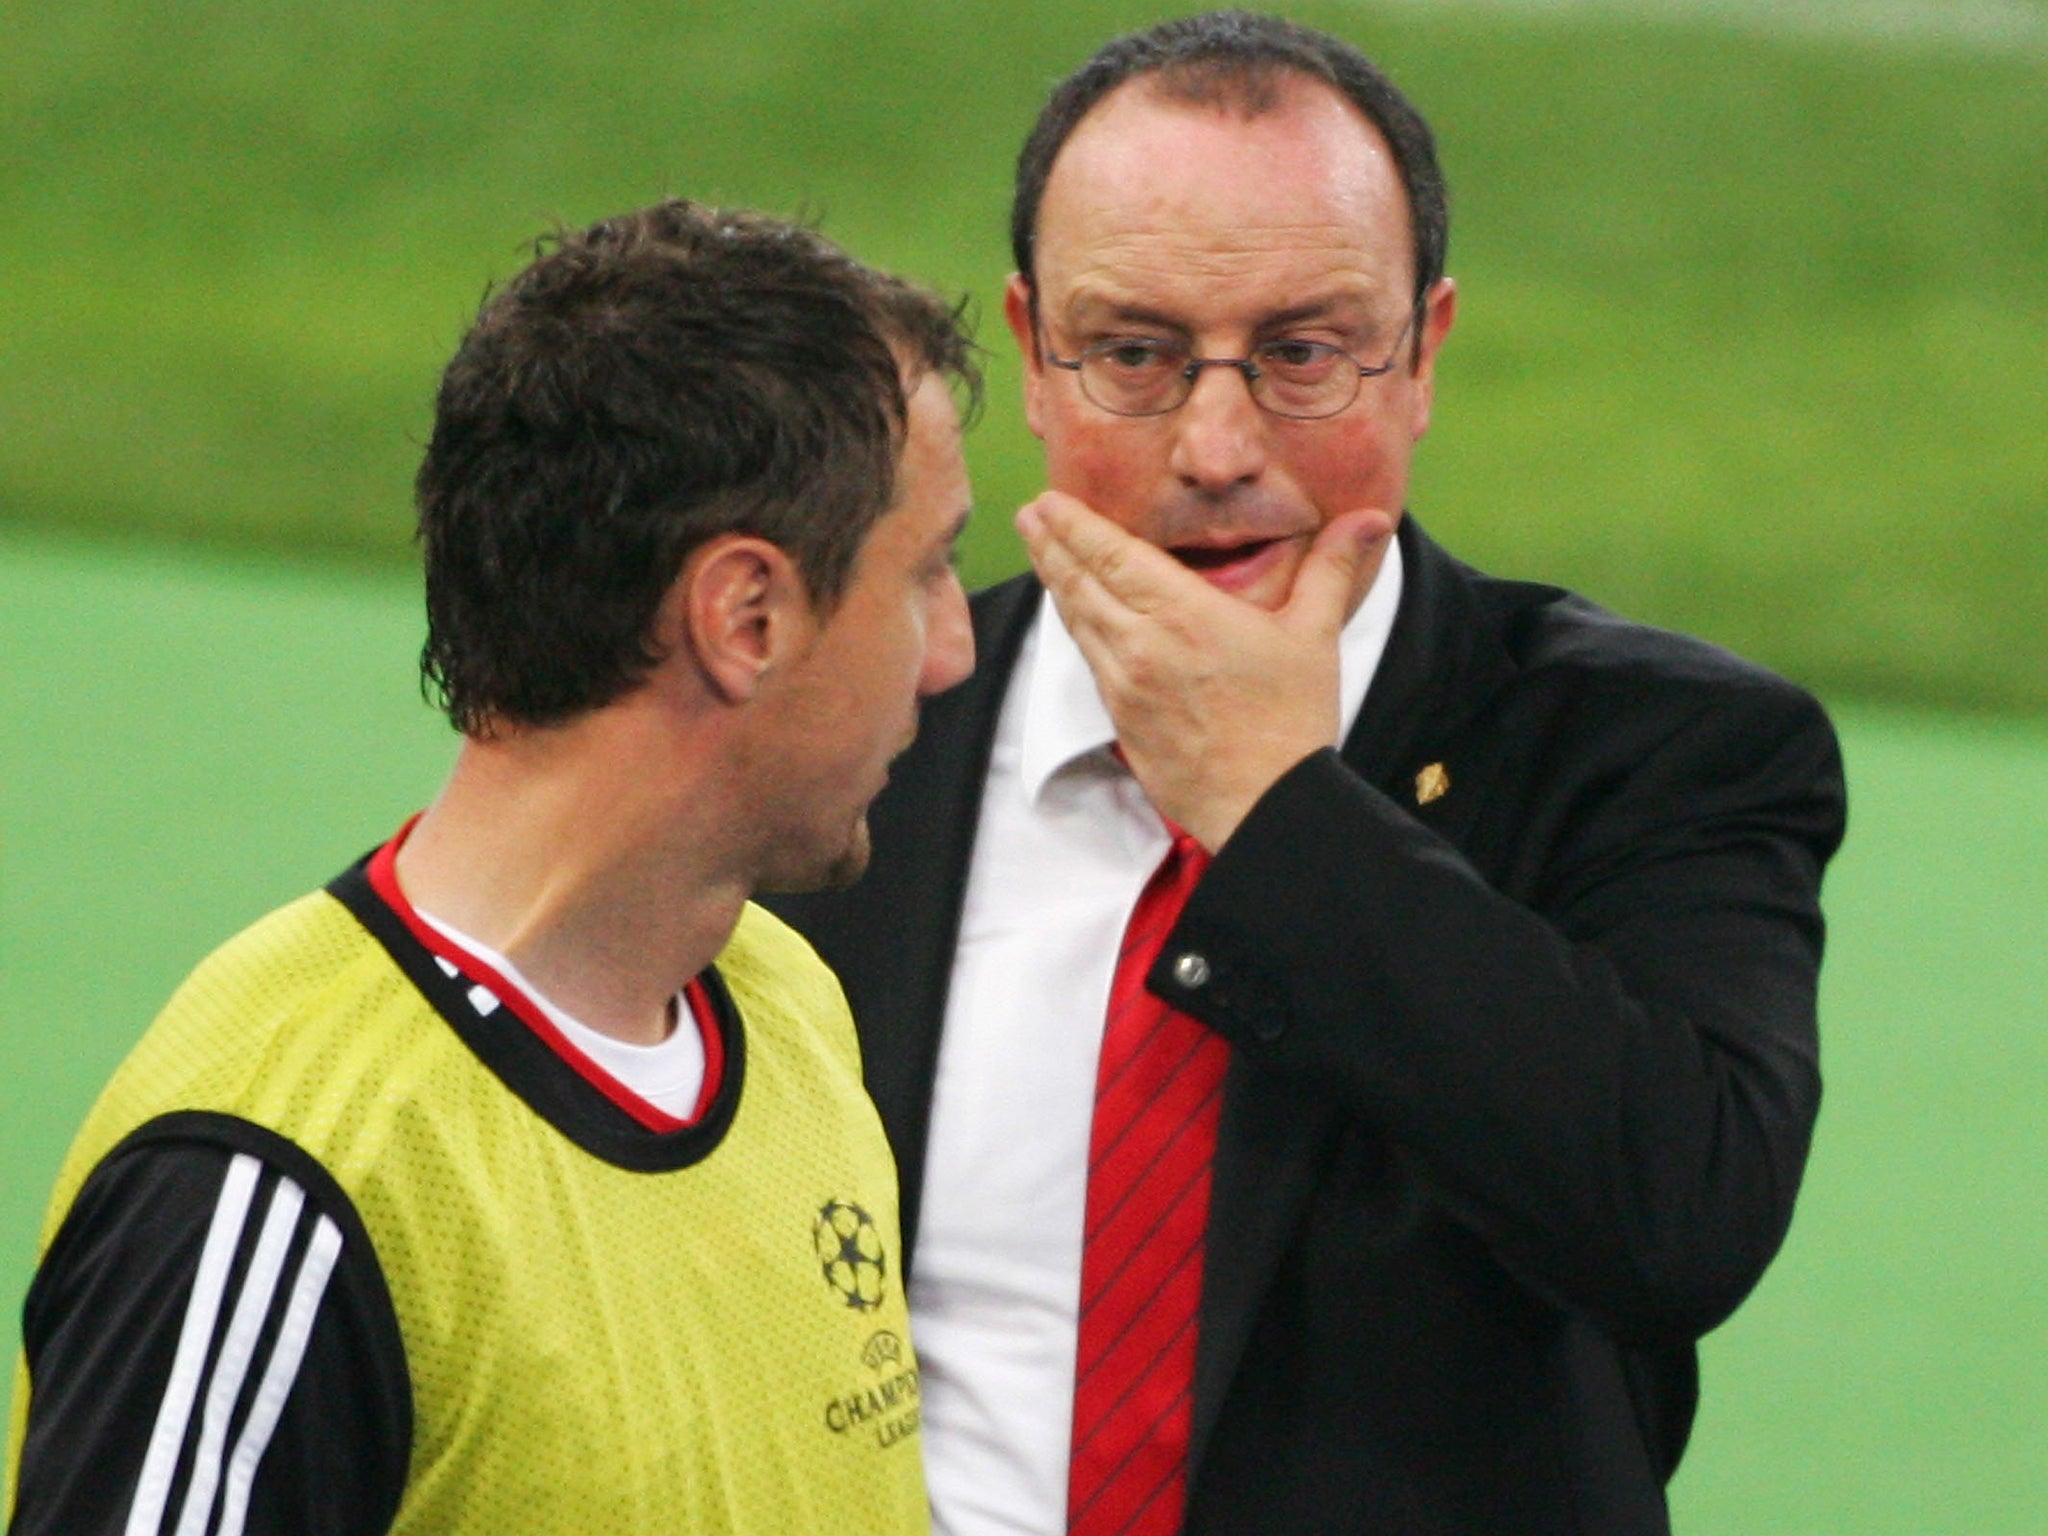 Former Liverpool goalkeeper Jerzy Dudek with Benitez in the 2007 Champions League final